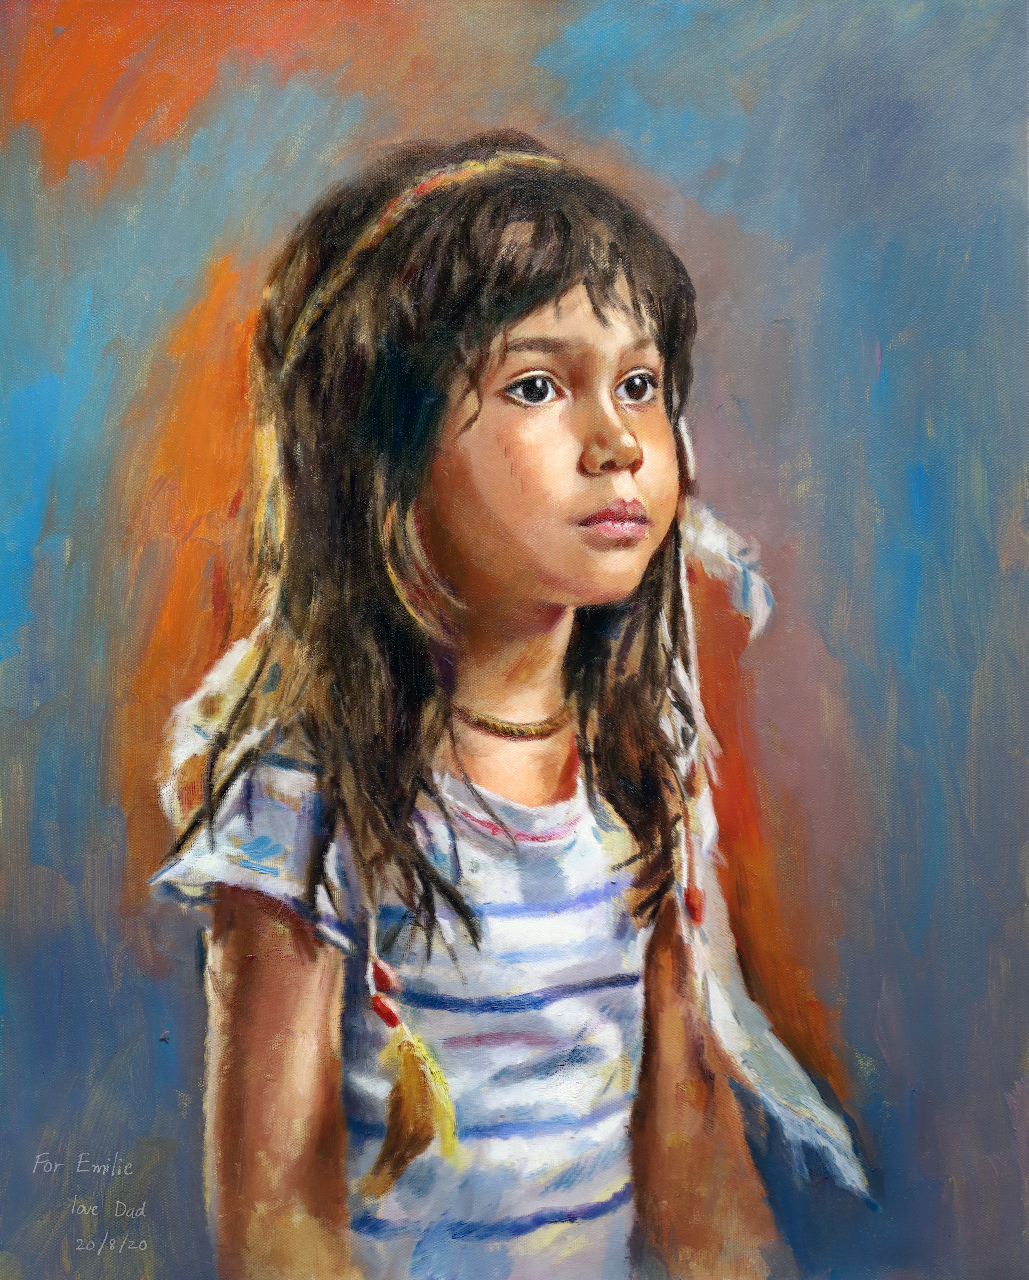 &ldquo;Portrait Painting in Oils of Emilie #4 by Dad&rdquo;